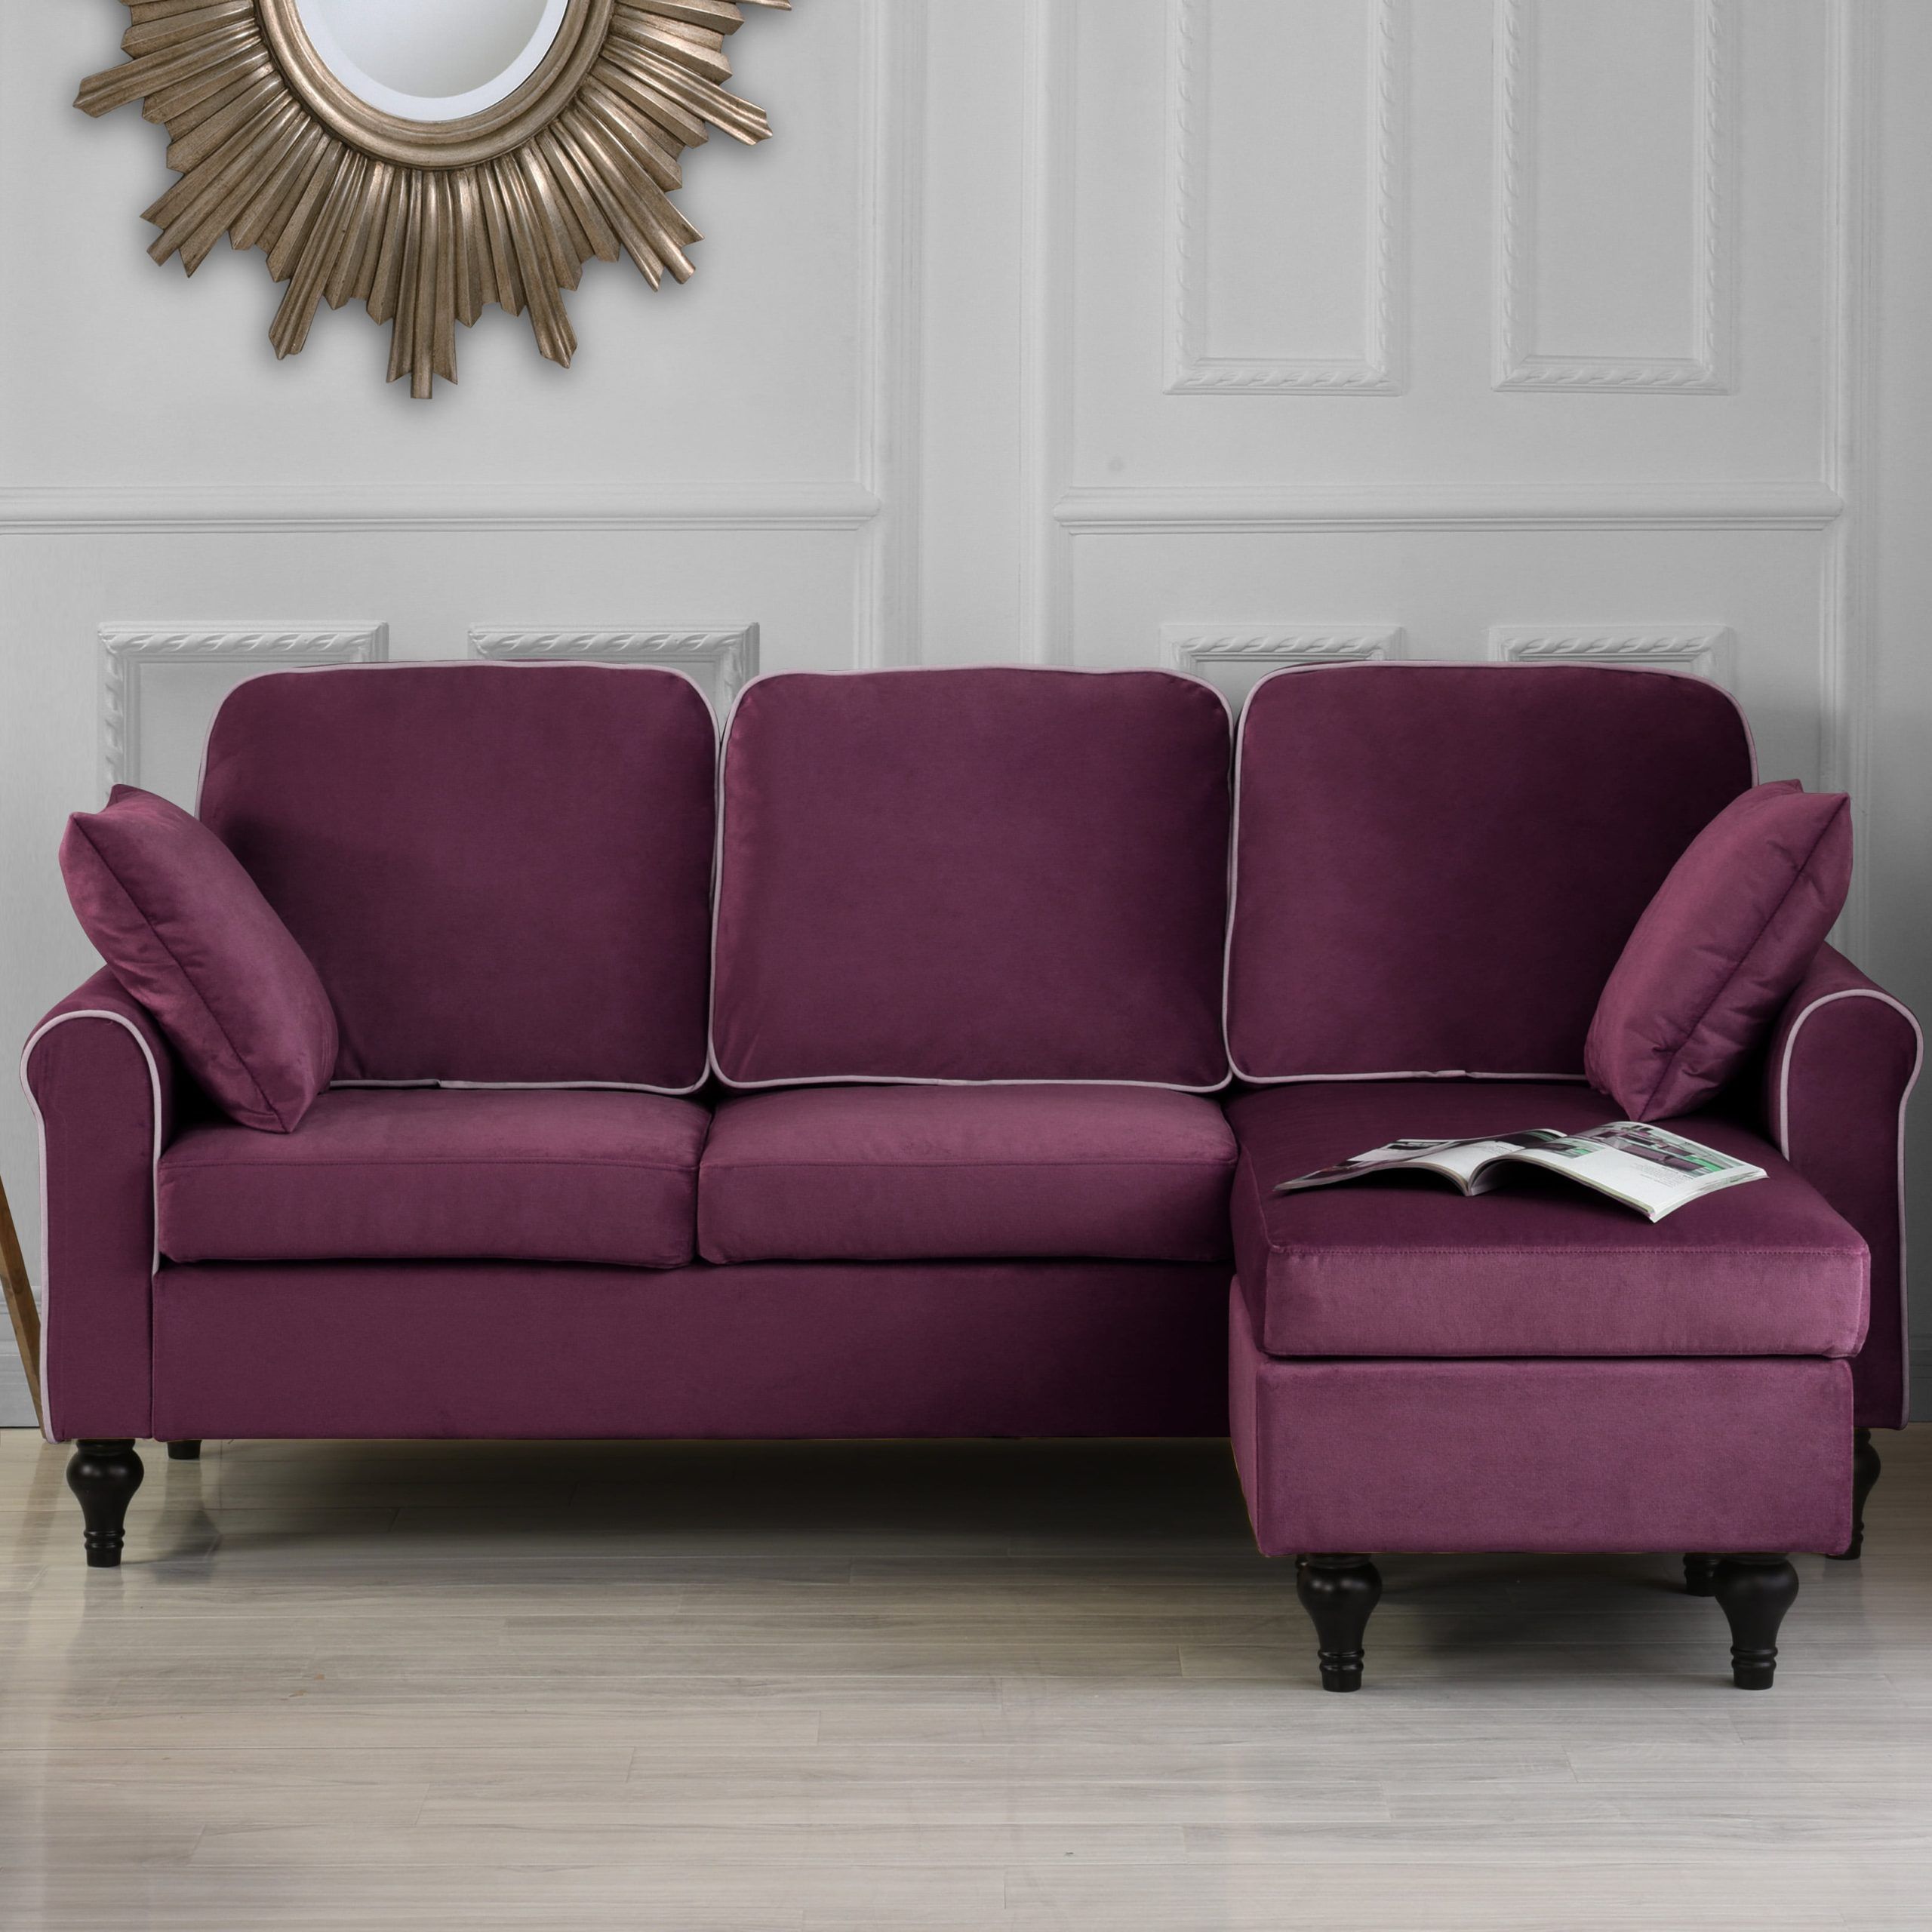 Sofas For Small Spaces Intended For Latest Classic And Traditional Small Space Velvet Sectional Sofa With (View 3 of 15)